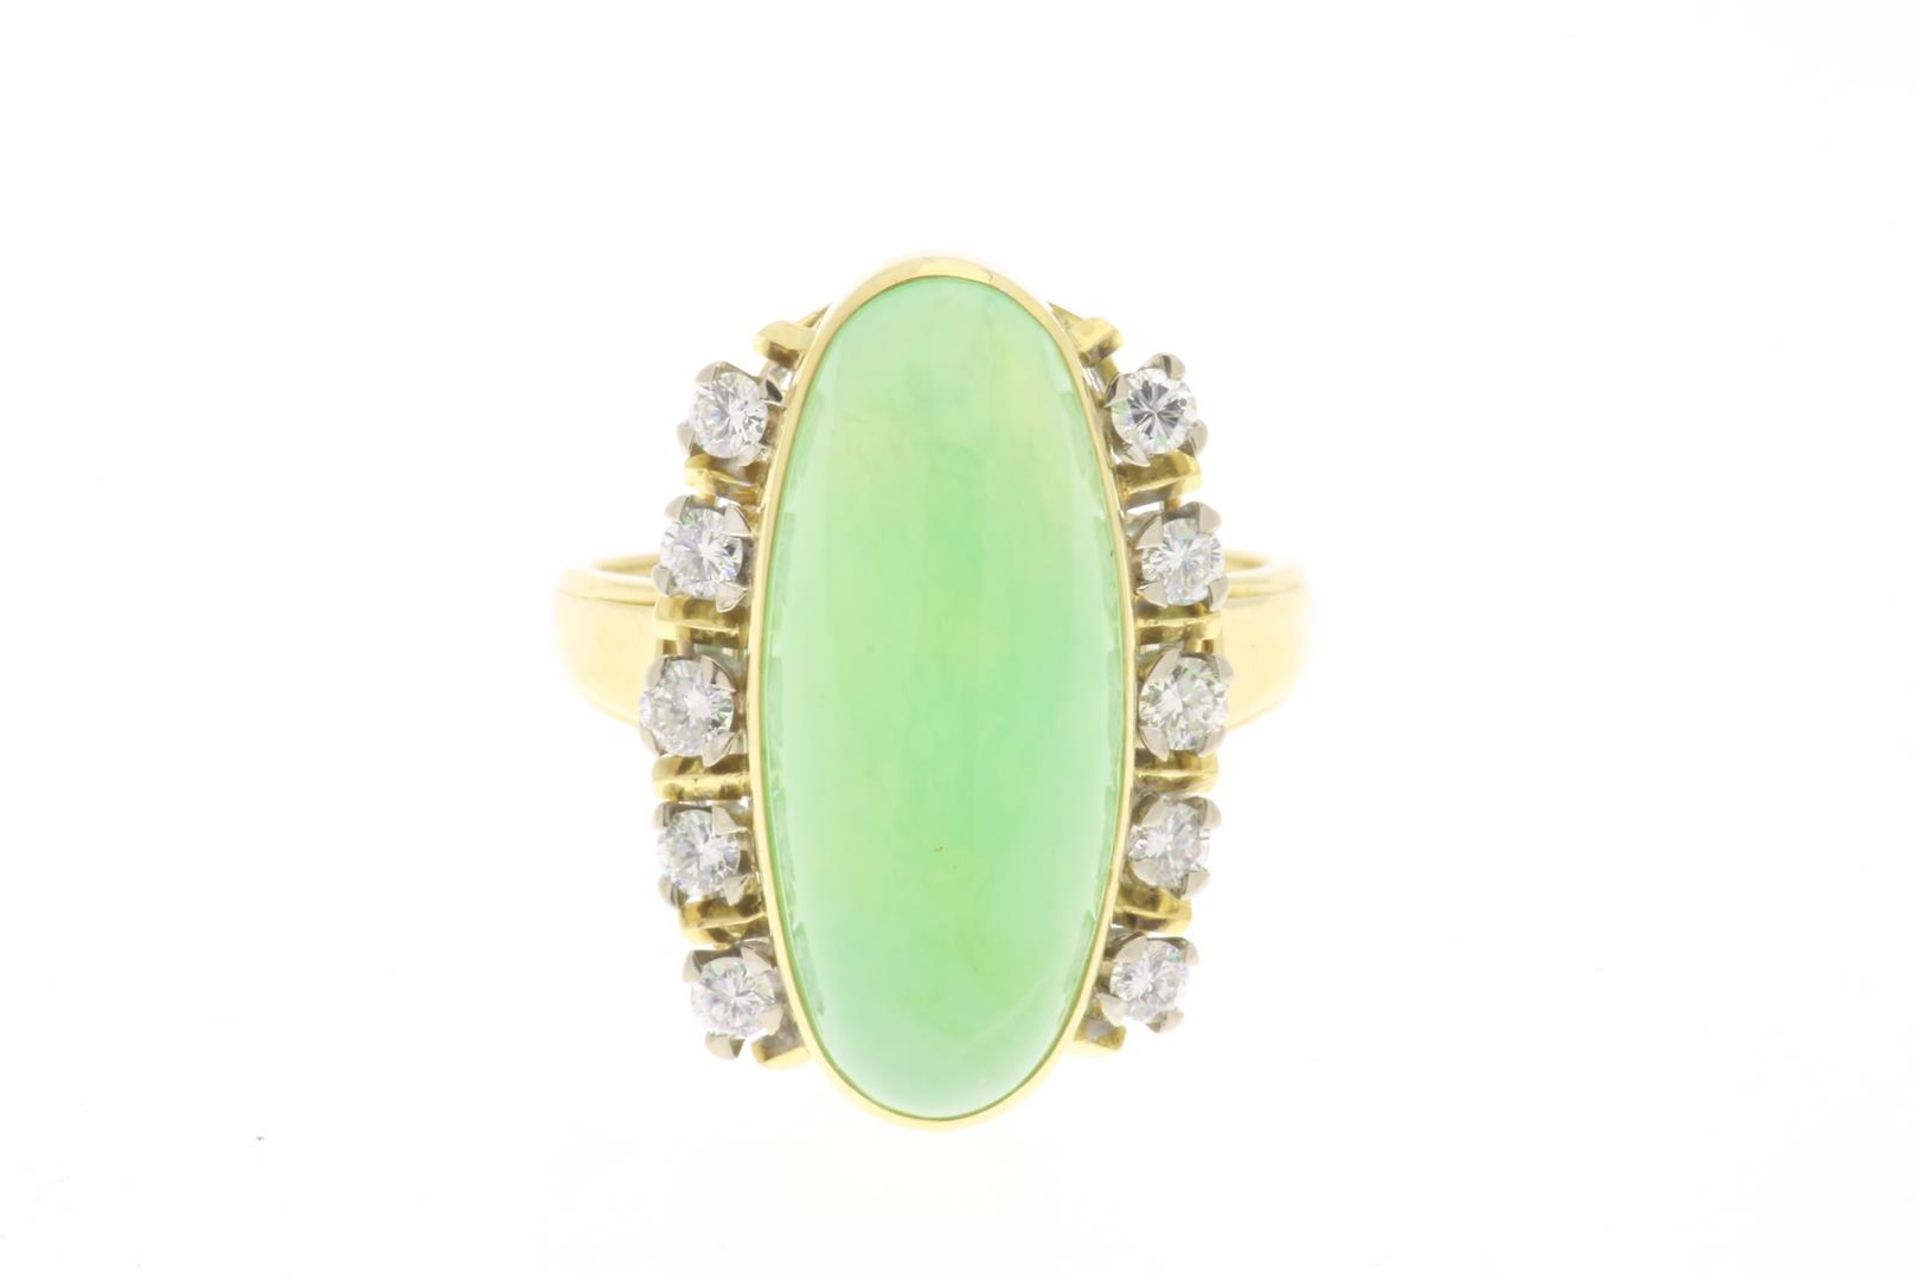 Bicolor ring with chrysoprase